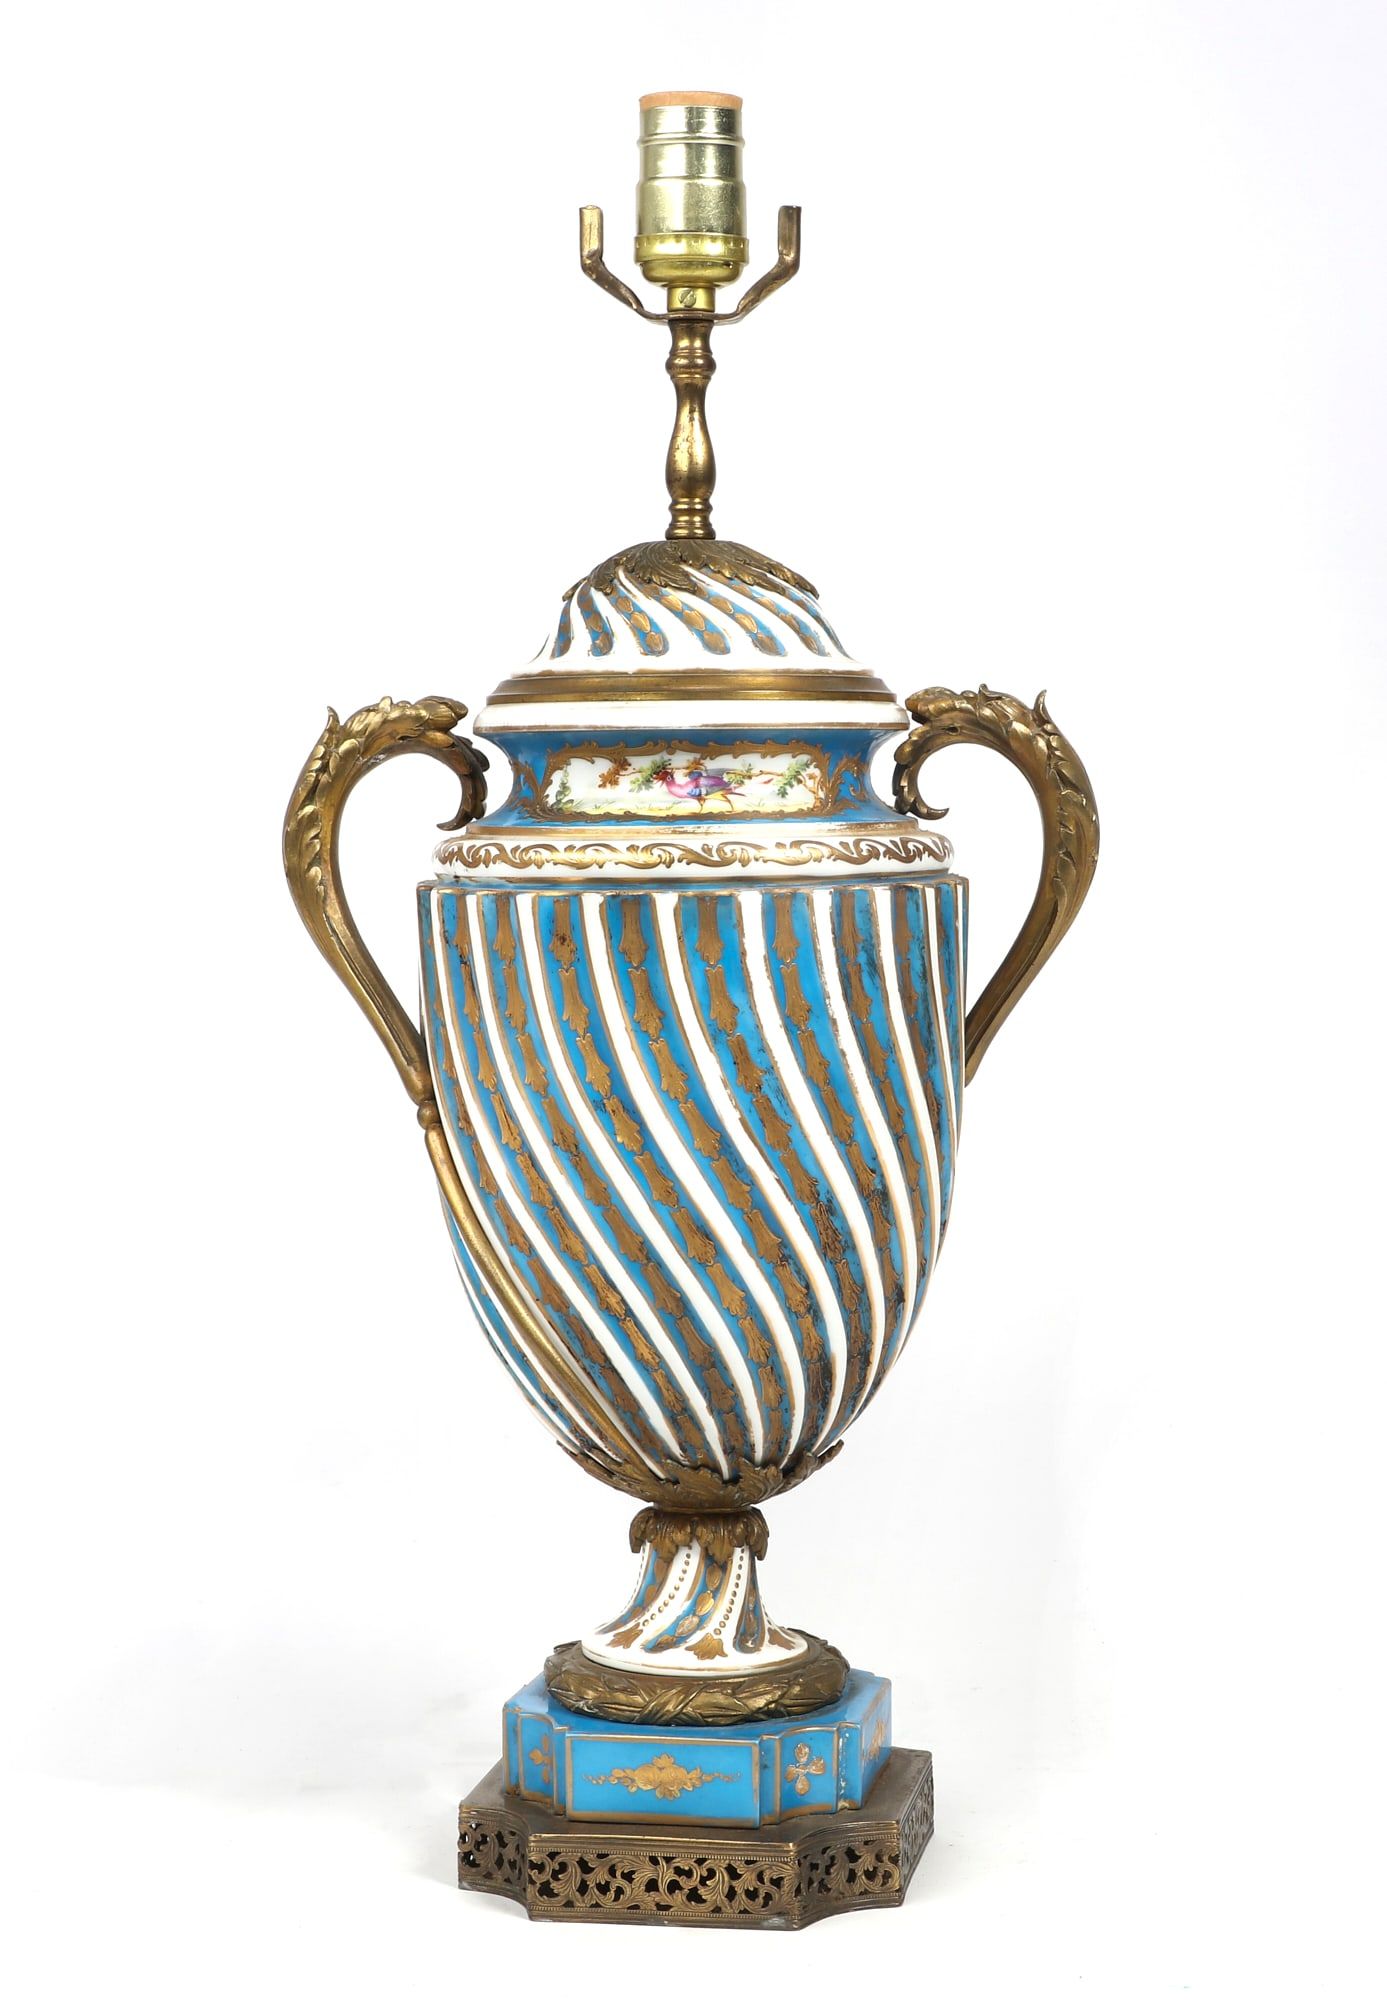 A GILT BRONZE MOUNTED SEVRES STYLE